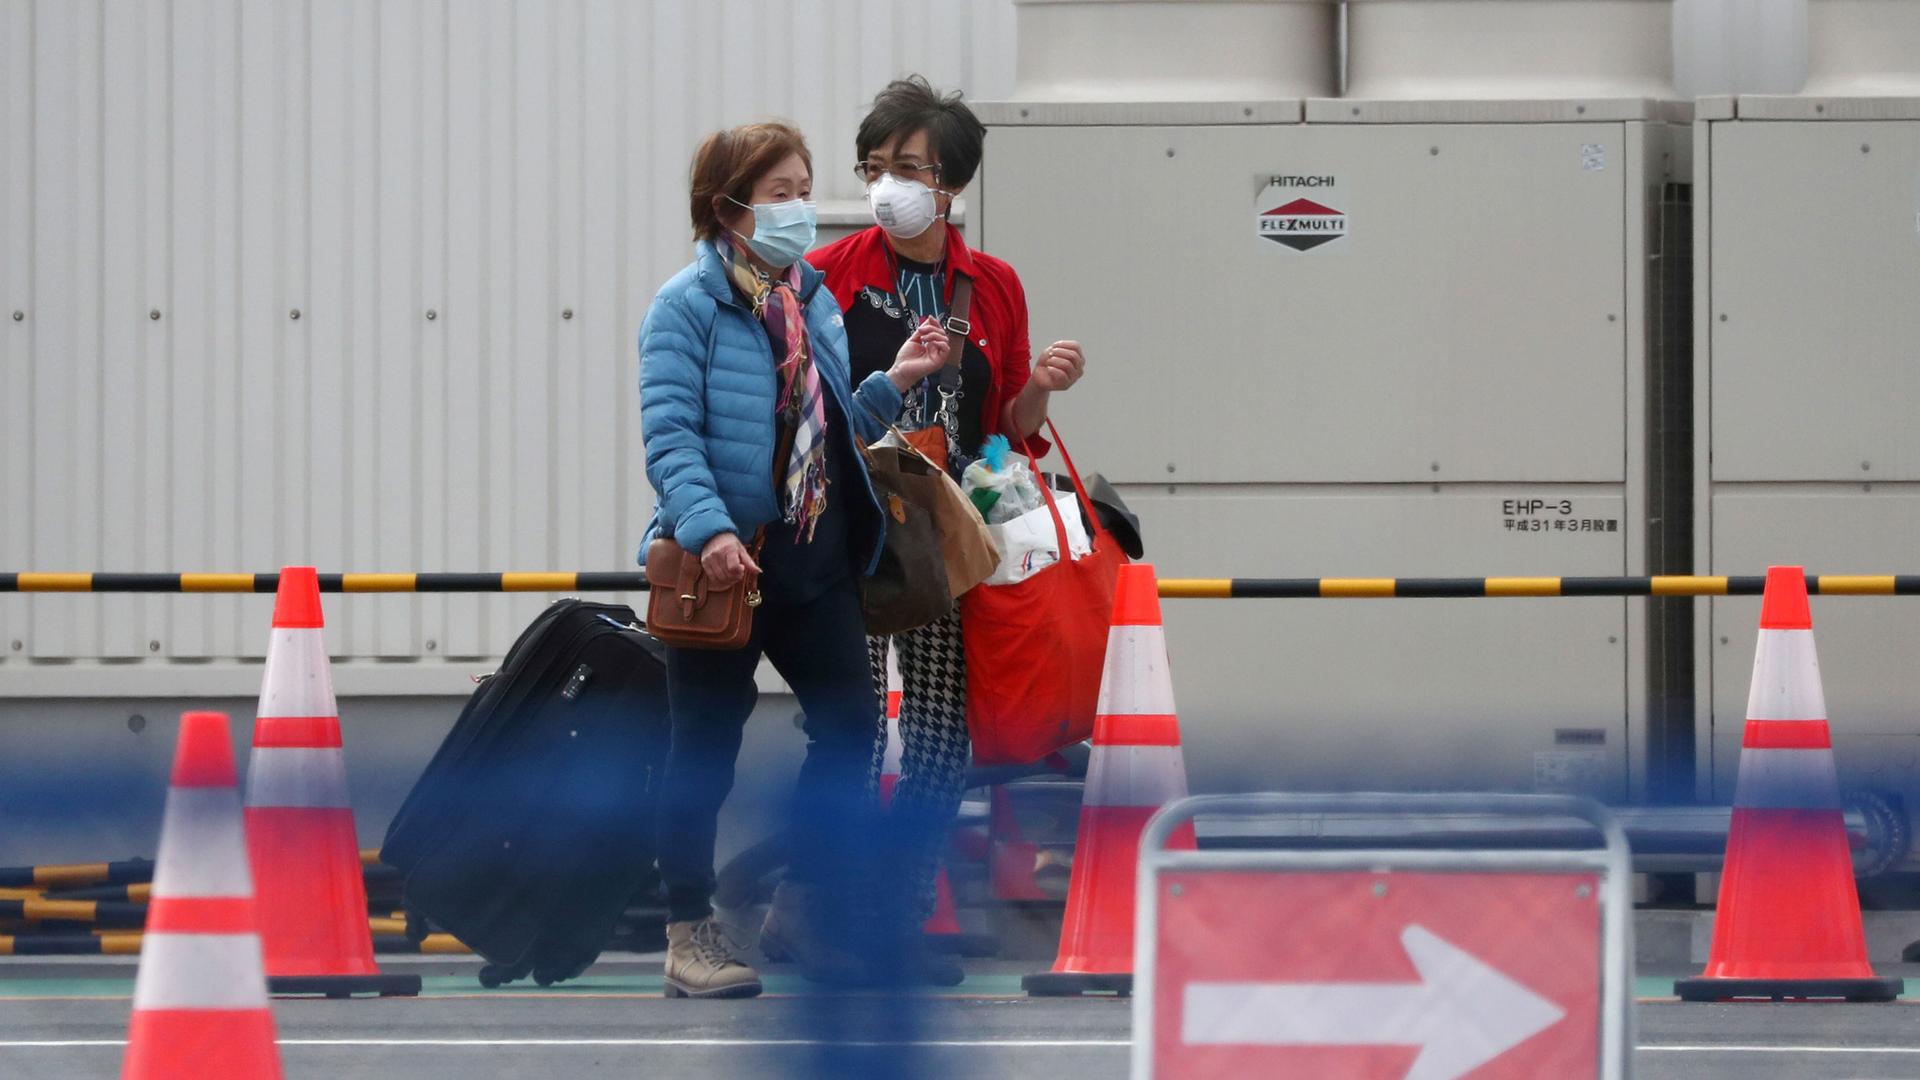 Two women are shown exiting a cruise ship wearing face masks and pulling suitcases.